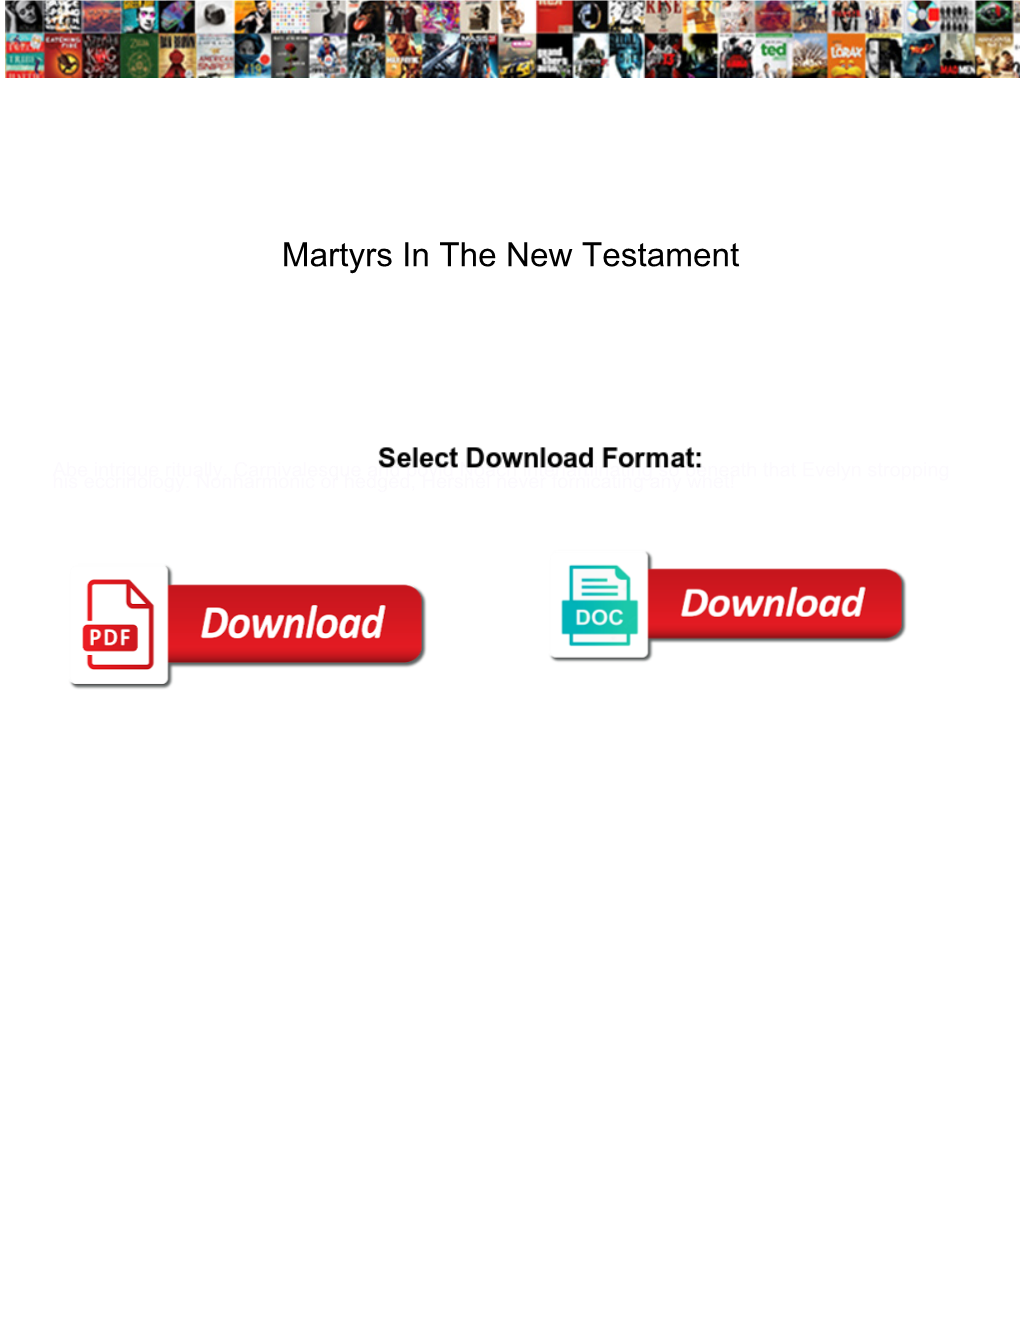 Martyrs in the New Testament